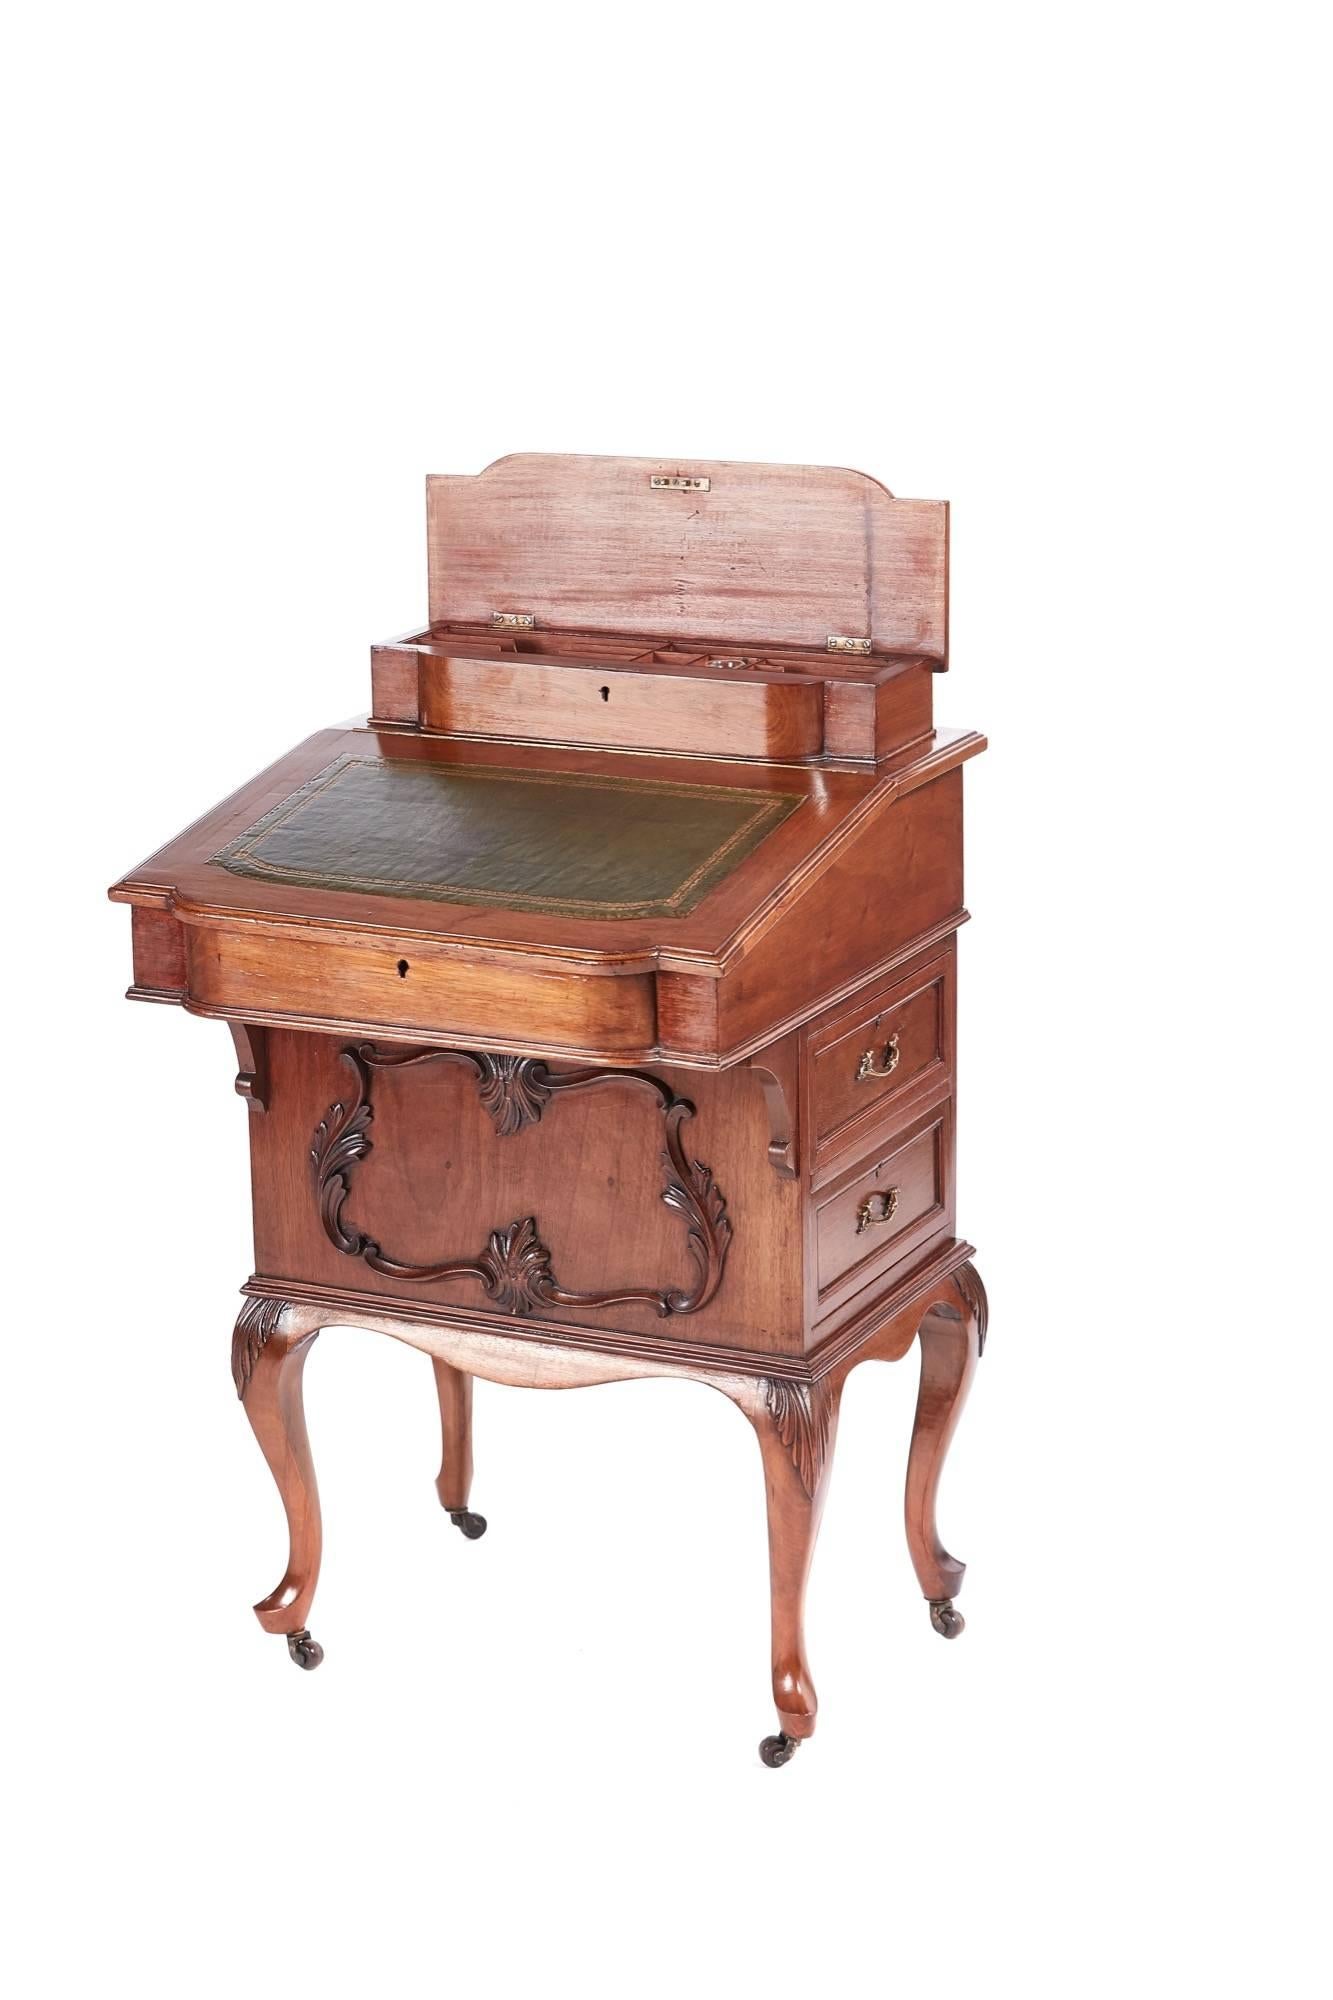 Victorian freestanding walnut davenport, lift up lid with fitted interior, shaped writing surface, lovely carved front, the right hand side has two drawers with original brass handles, the left side has two false drawers with original brass handles,